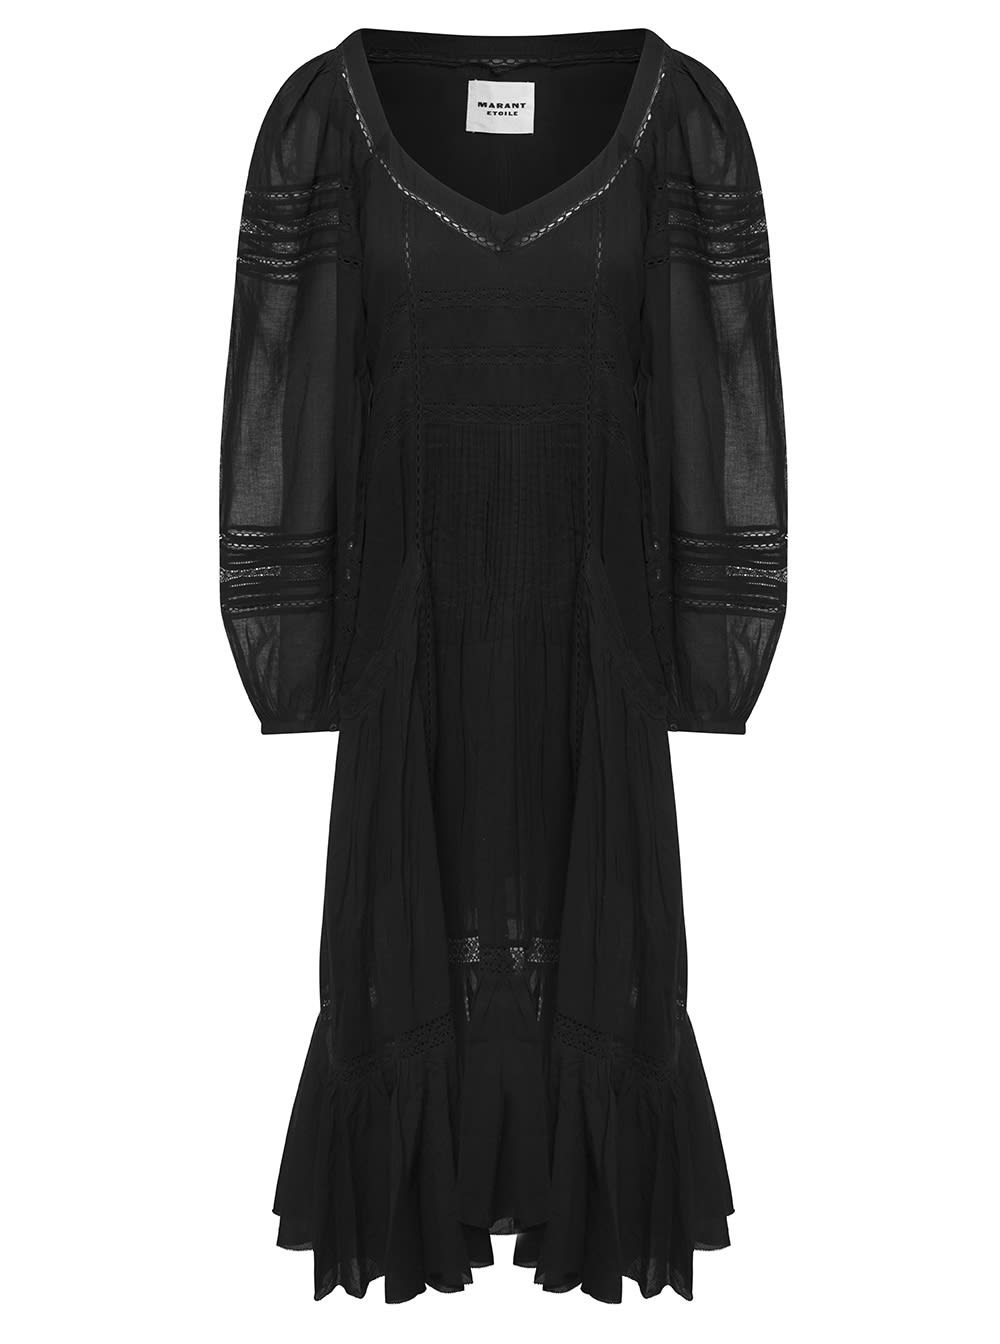 ISABEL MARANT ÉTOILE BLACK MID-LENGTH FLARED DRESS IN COTTON WOMAN